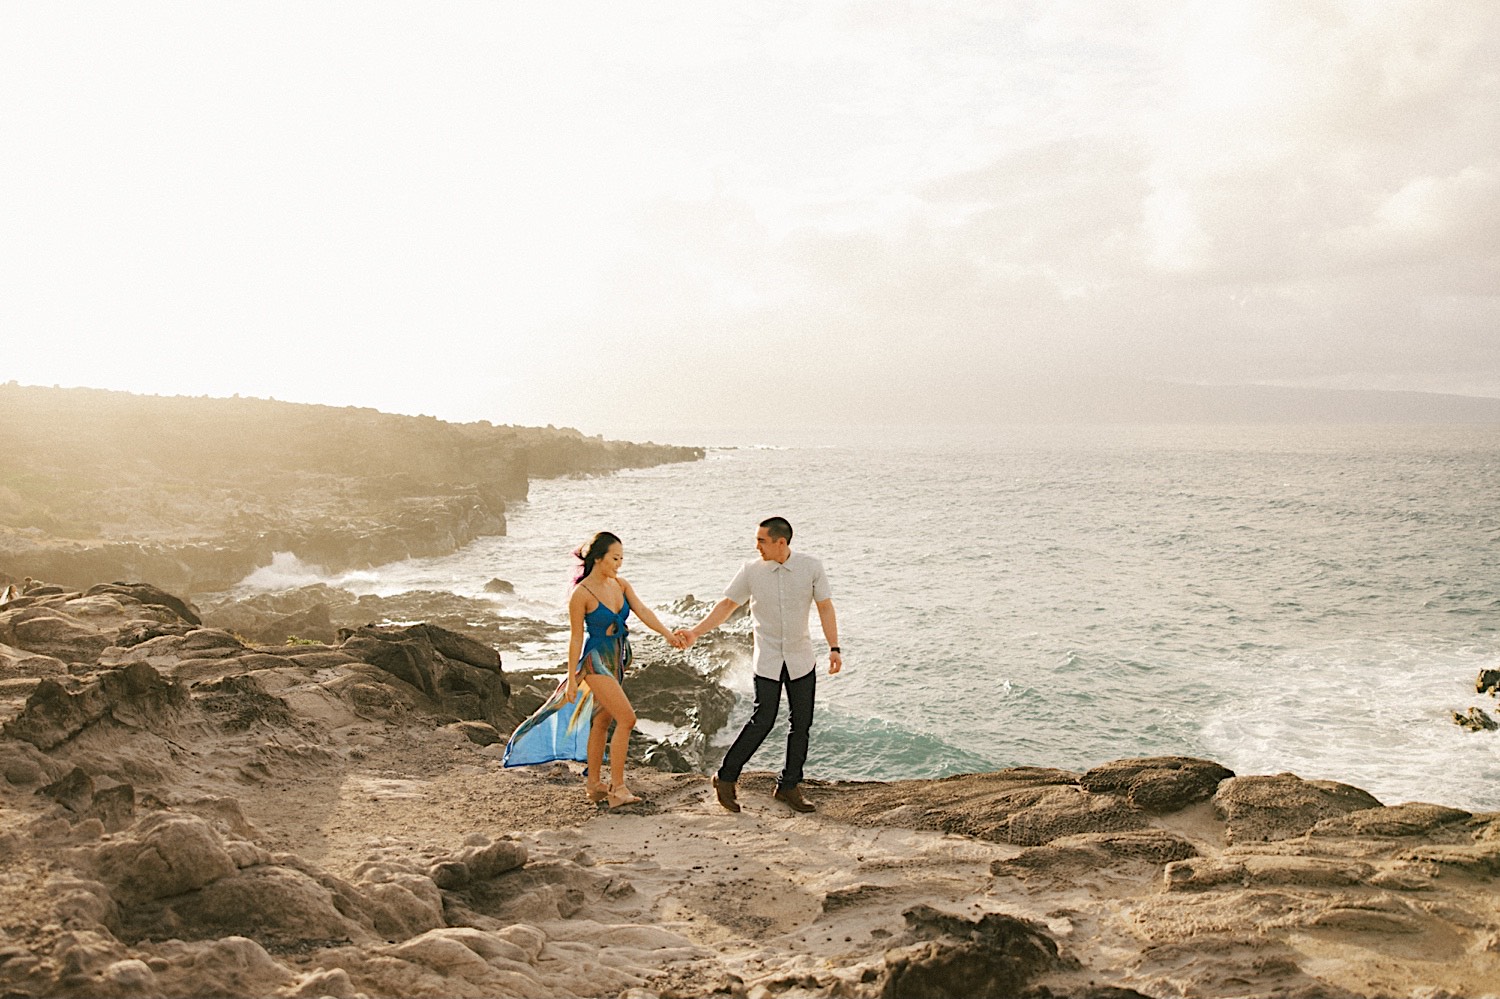 During their engagement session on the island of Maui a man and woman walk hand in hand on a cliff looking out over the ocean below them as the sun sets to the left